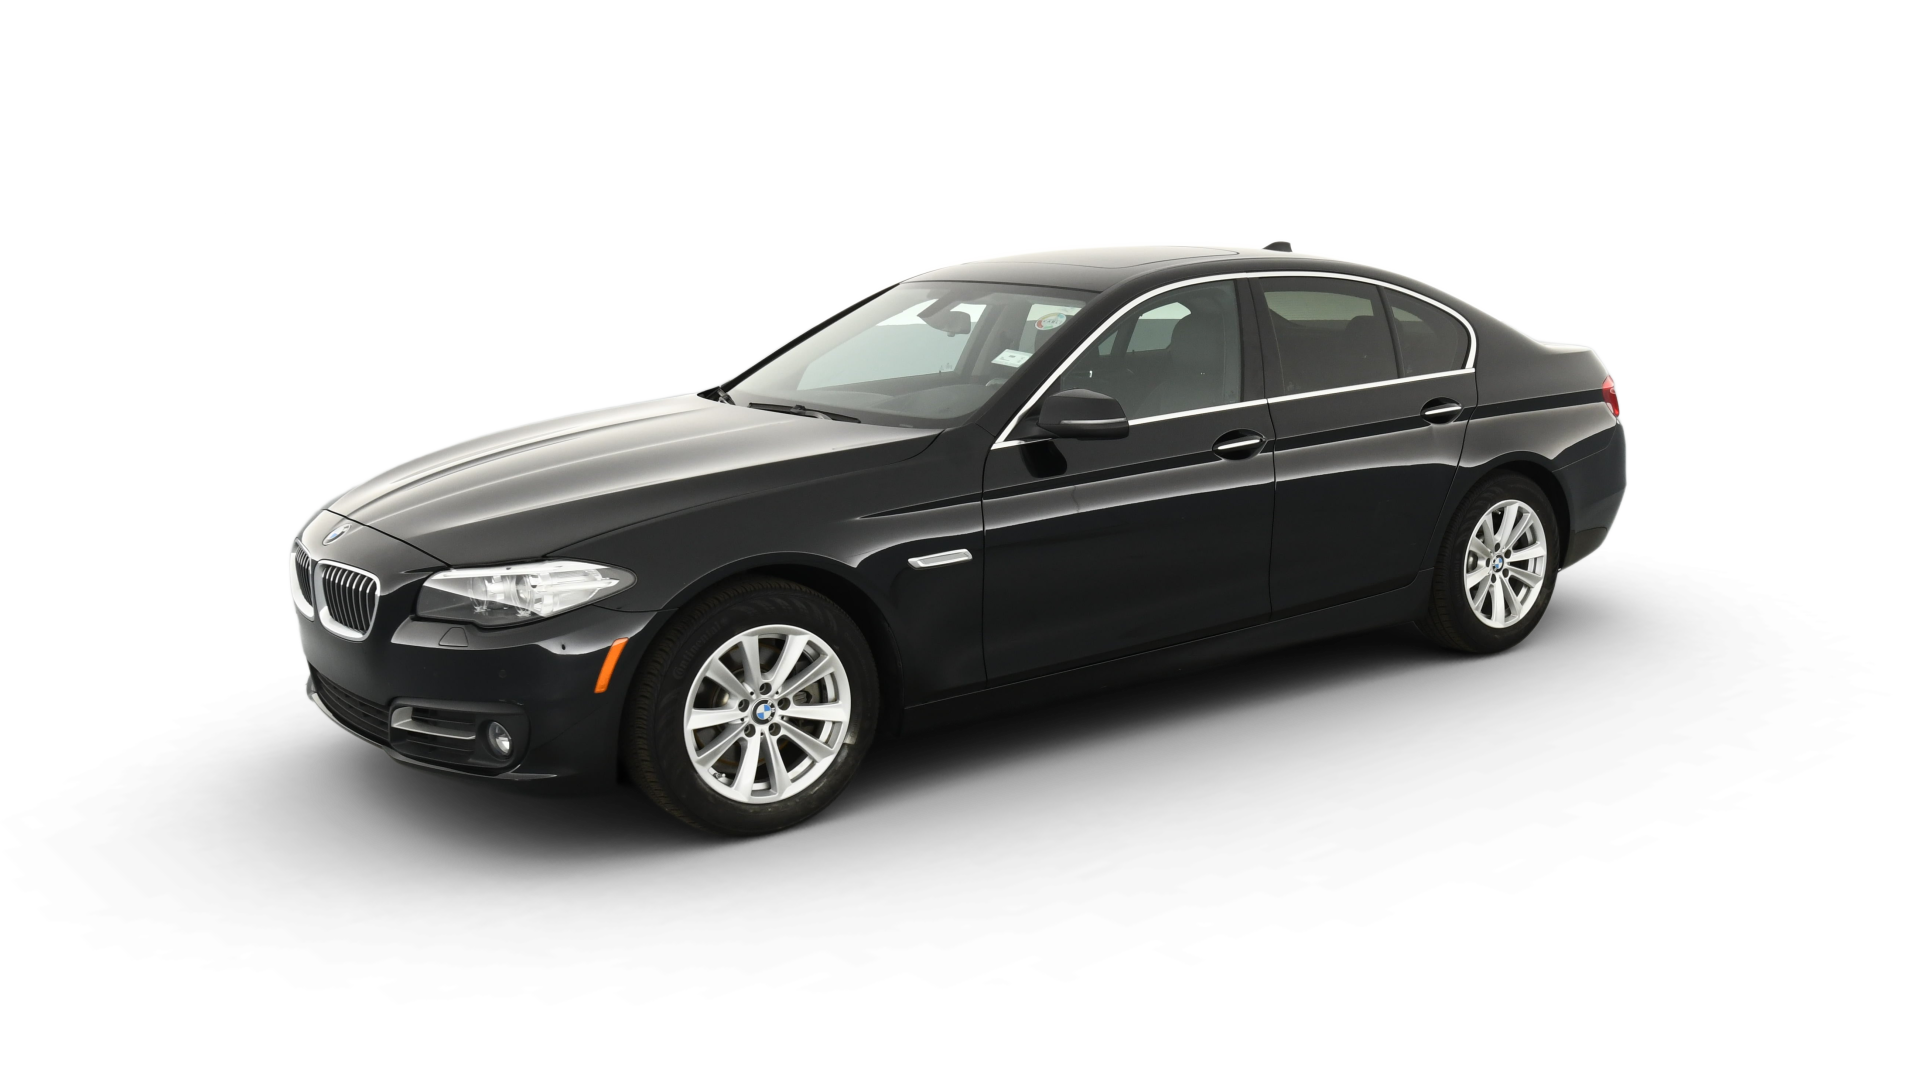 Used BMW 5 Series 528i For Sale Online | Carvana